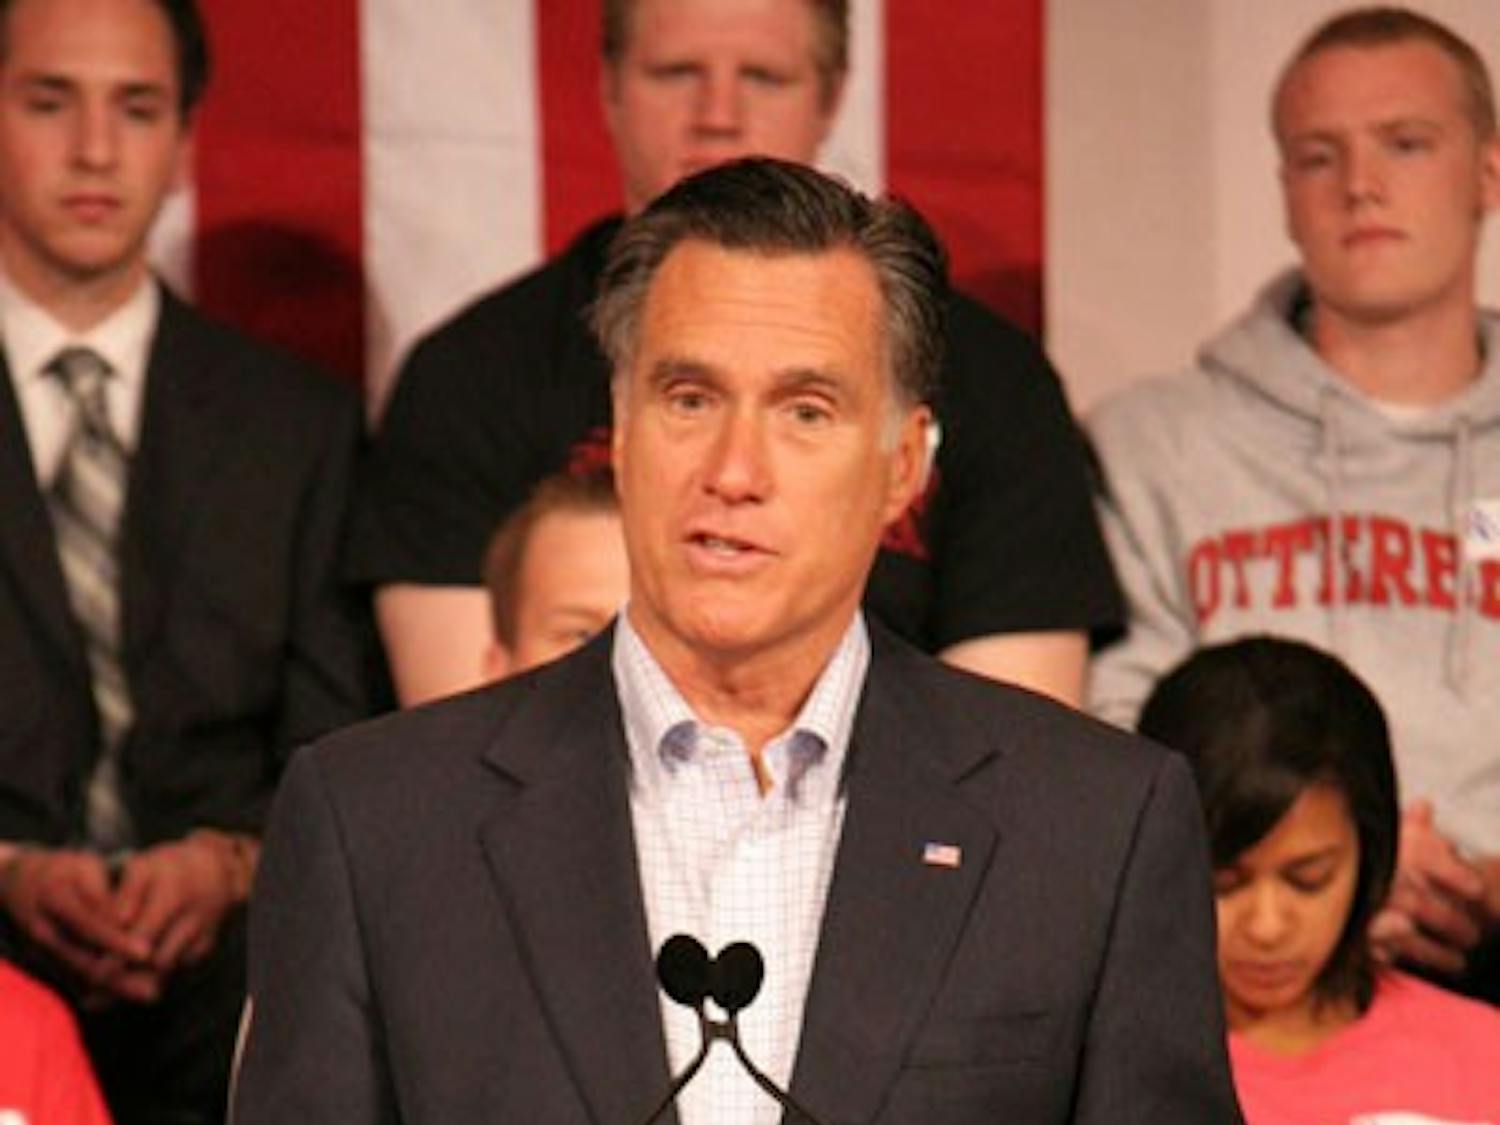 Romney gives his speech to the public audience